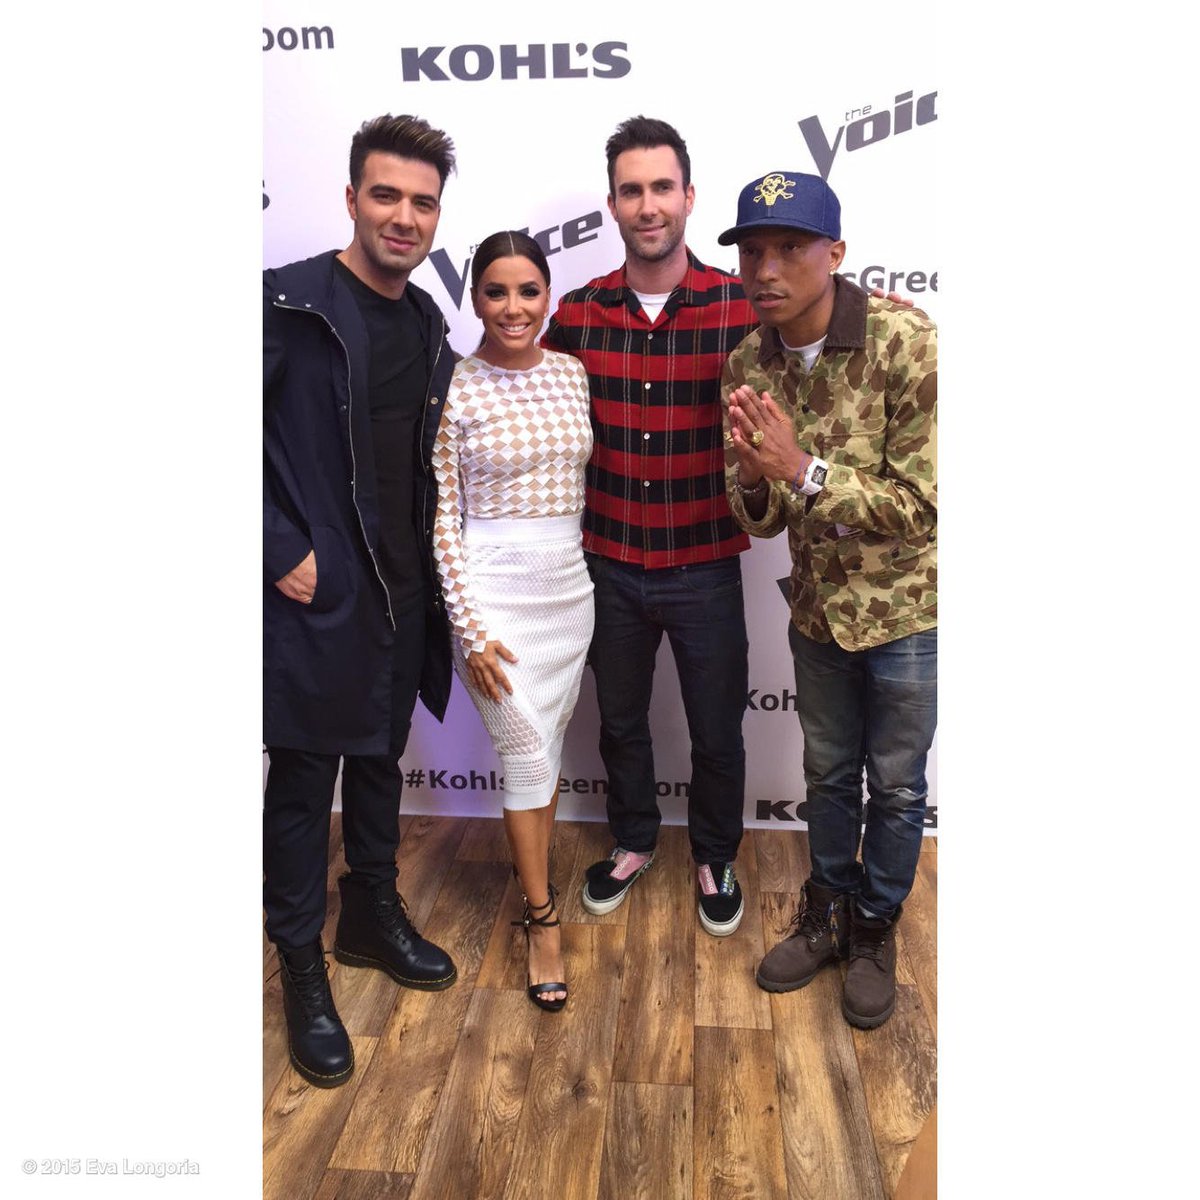 Hanging out with @adamlevine and @pharrell at The Voice!! #Telenovela @jencarlosmusic https://t.co/FHcgyqPkT1